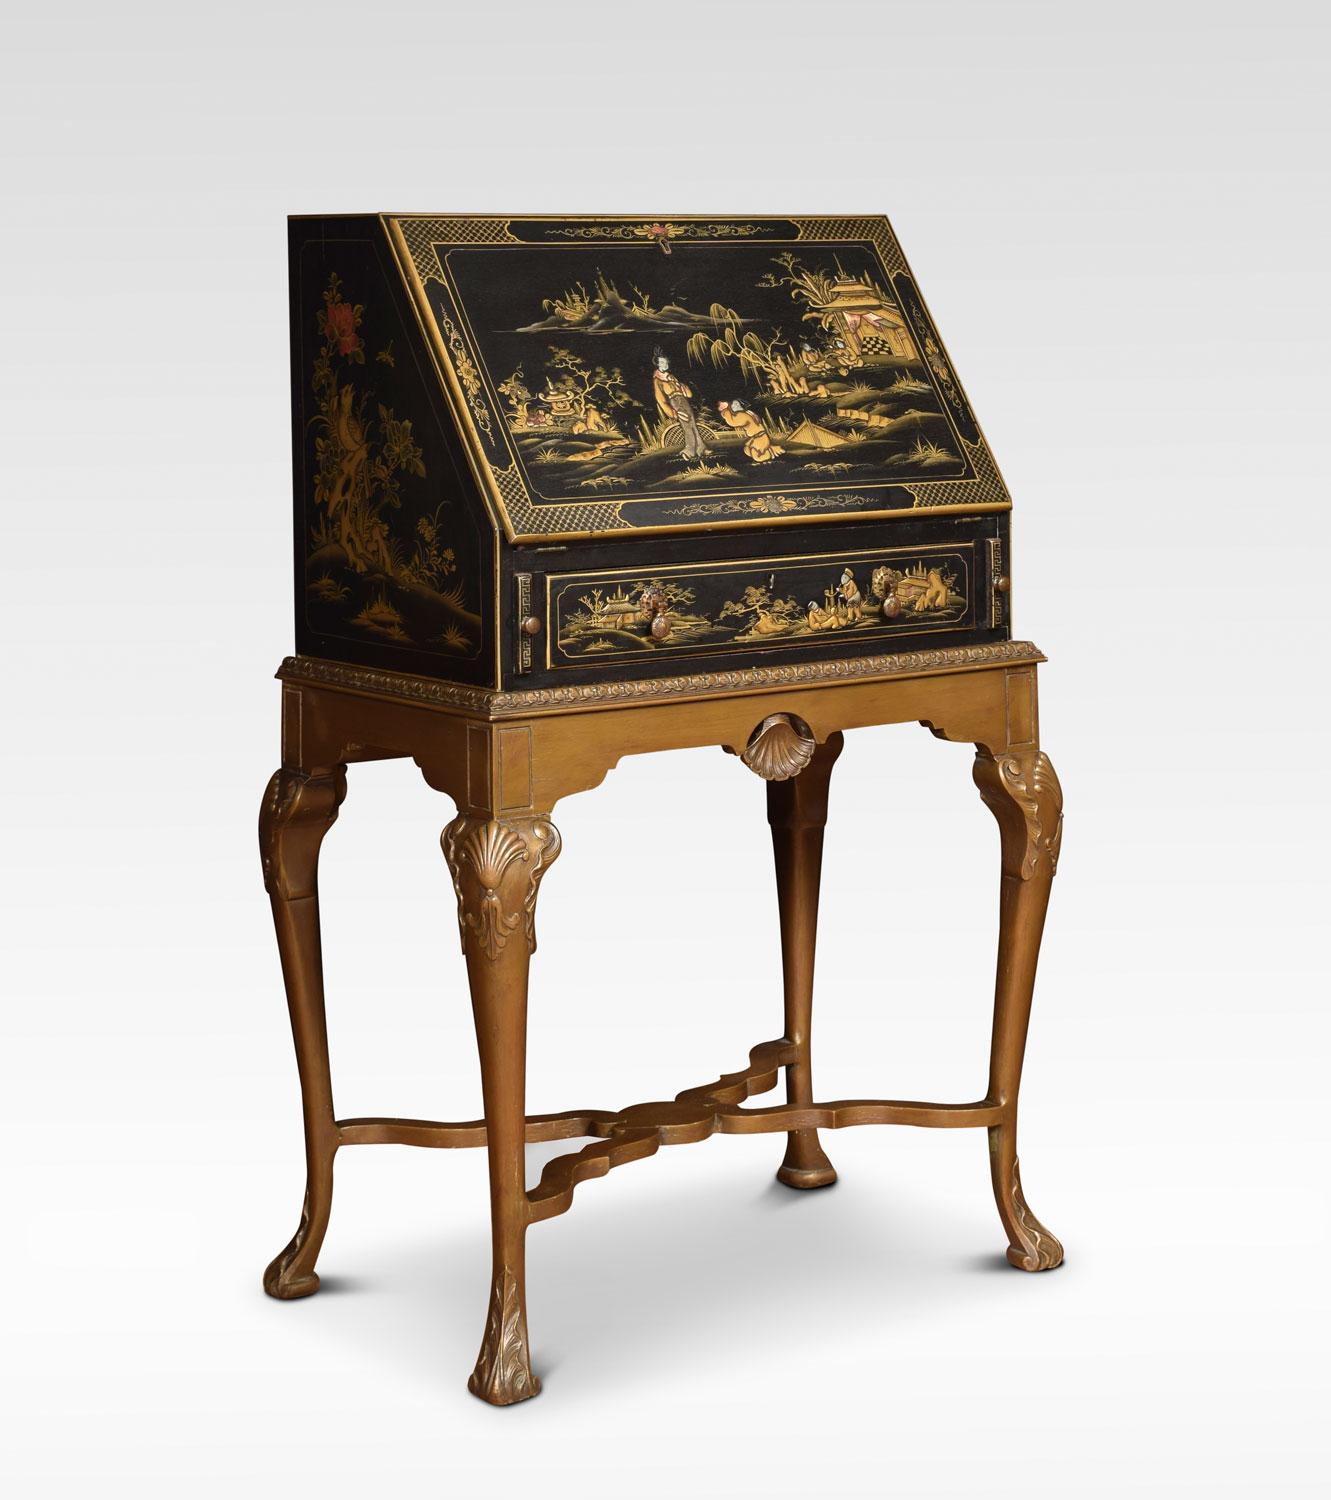 Black lacquer chinoiserie decorated bureau on stand. Painted with typical chinoiserie landscapes within hatched and floral borders. The fall front opening to reveal blue lacquered interior having dragon amidst clouds. The inset tooled leather faux